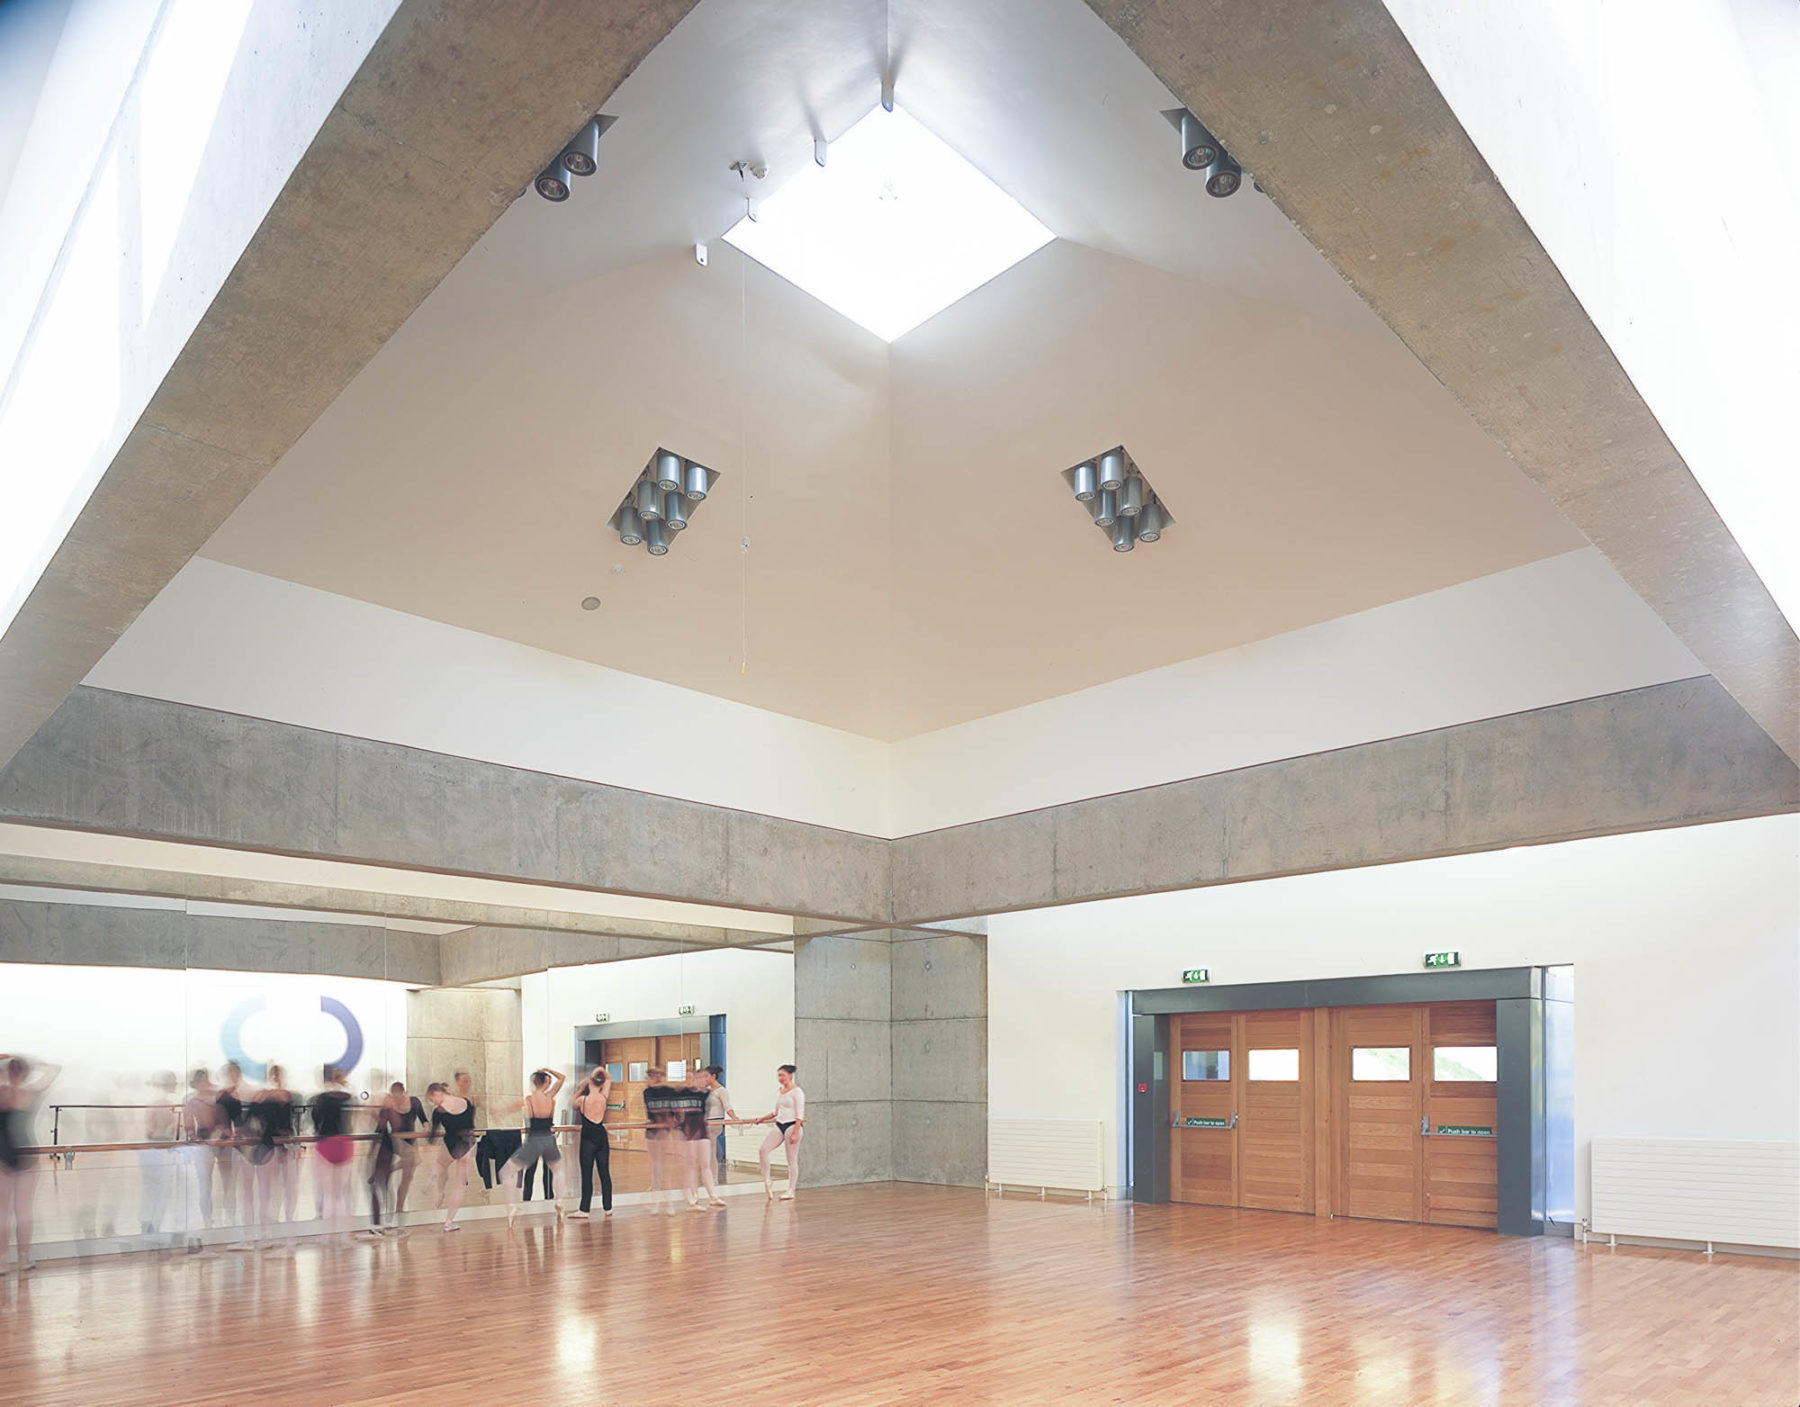 Large square studio at DanceBase Edinburgh, dancers training by mirror. Studio is lit from the skylight in the trapezoid roof. Malcolm Fraser Architects